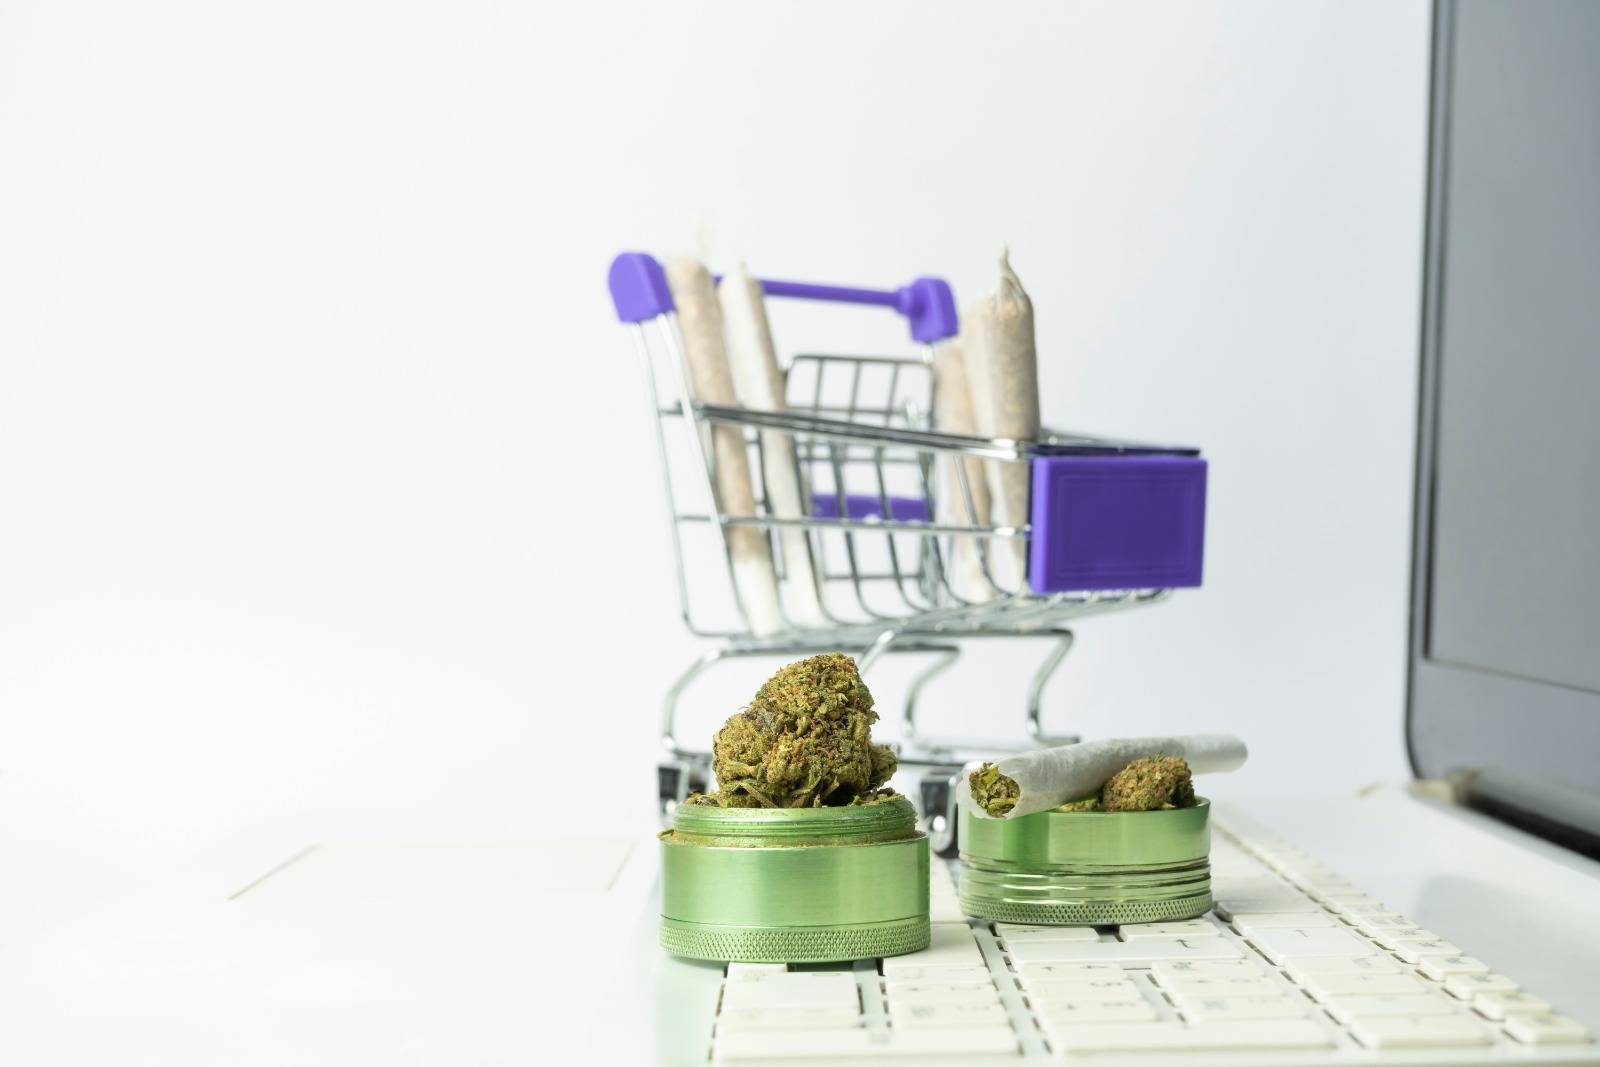 Grinder with marijuana buds and joints in shopping cart ordering from a Manitoba dispensary. Speed Greens